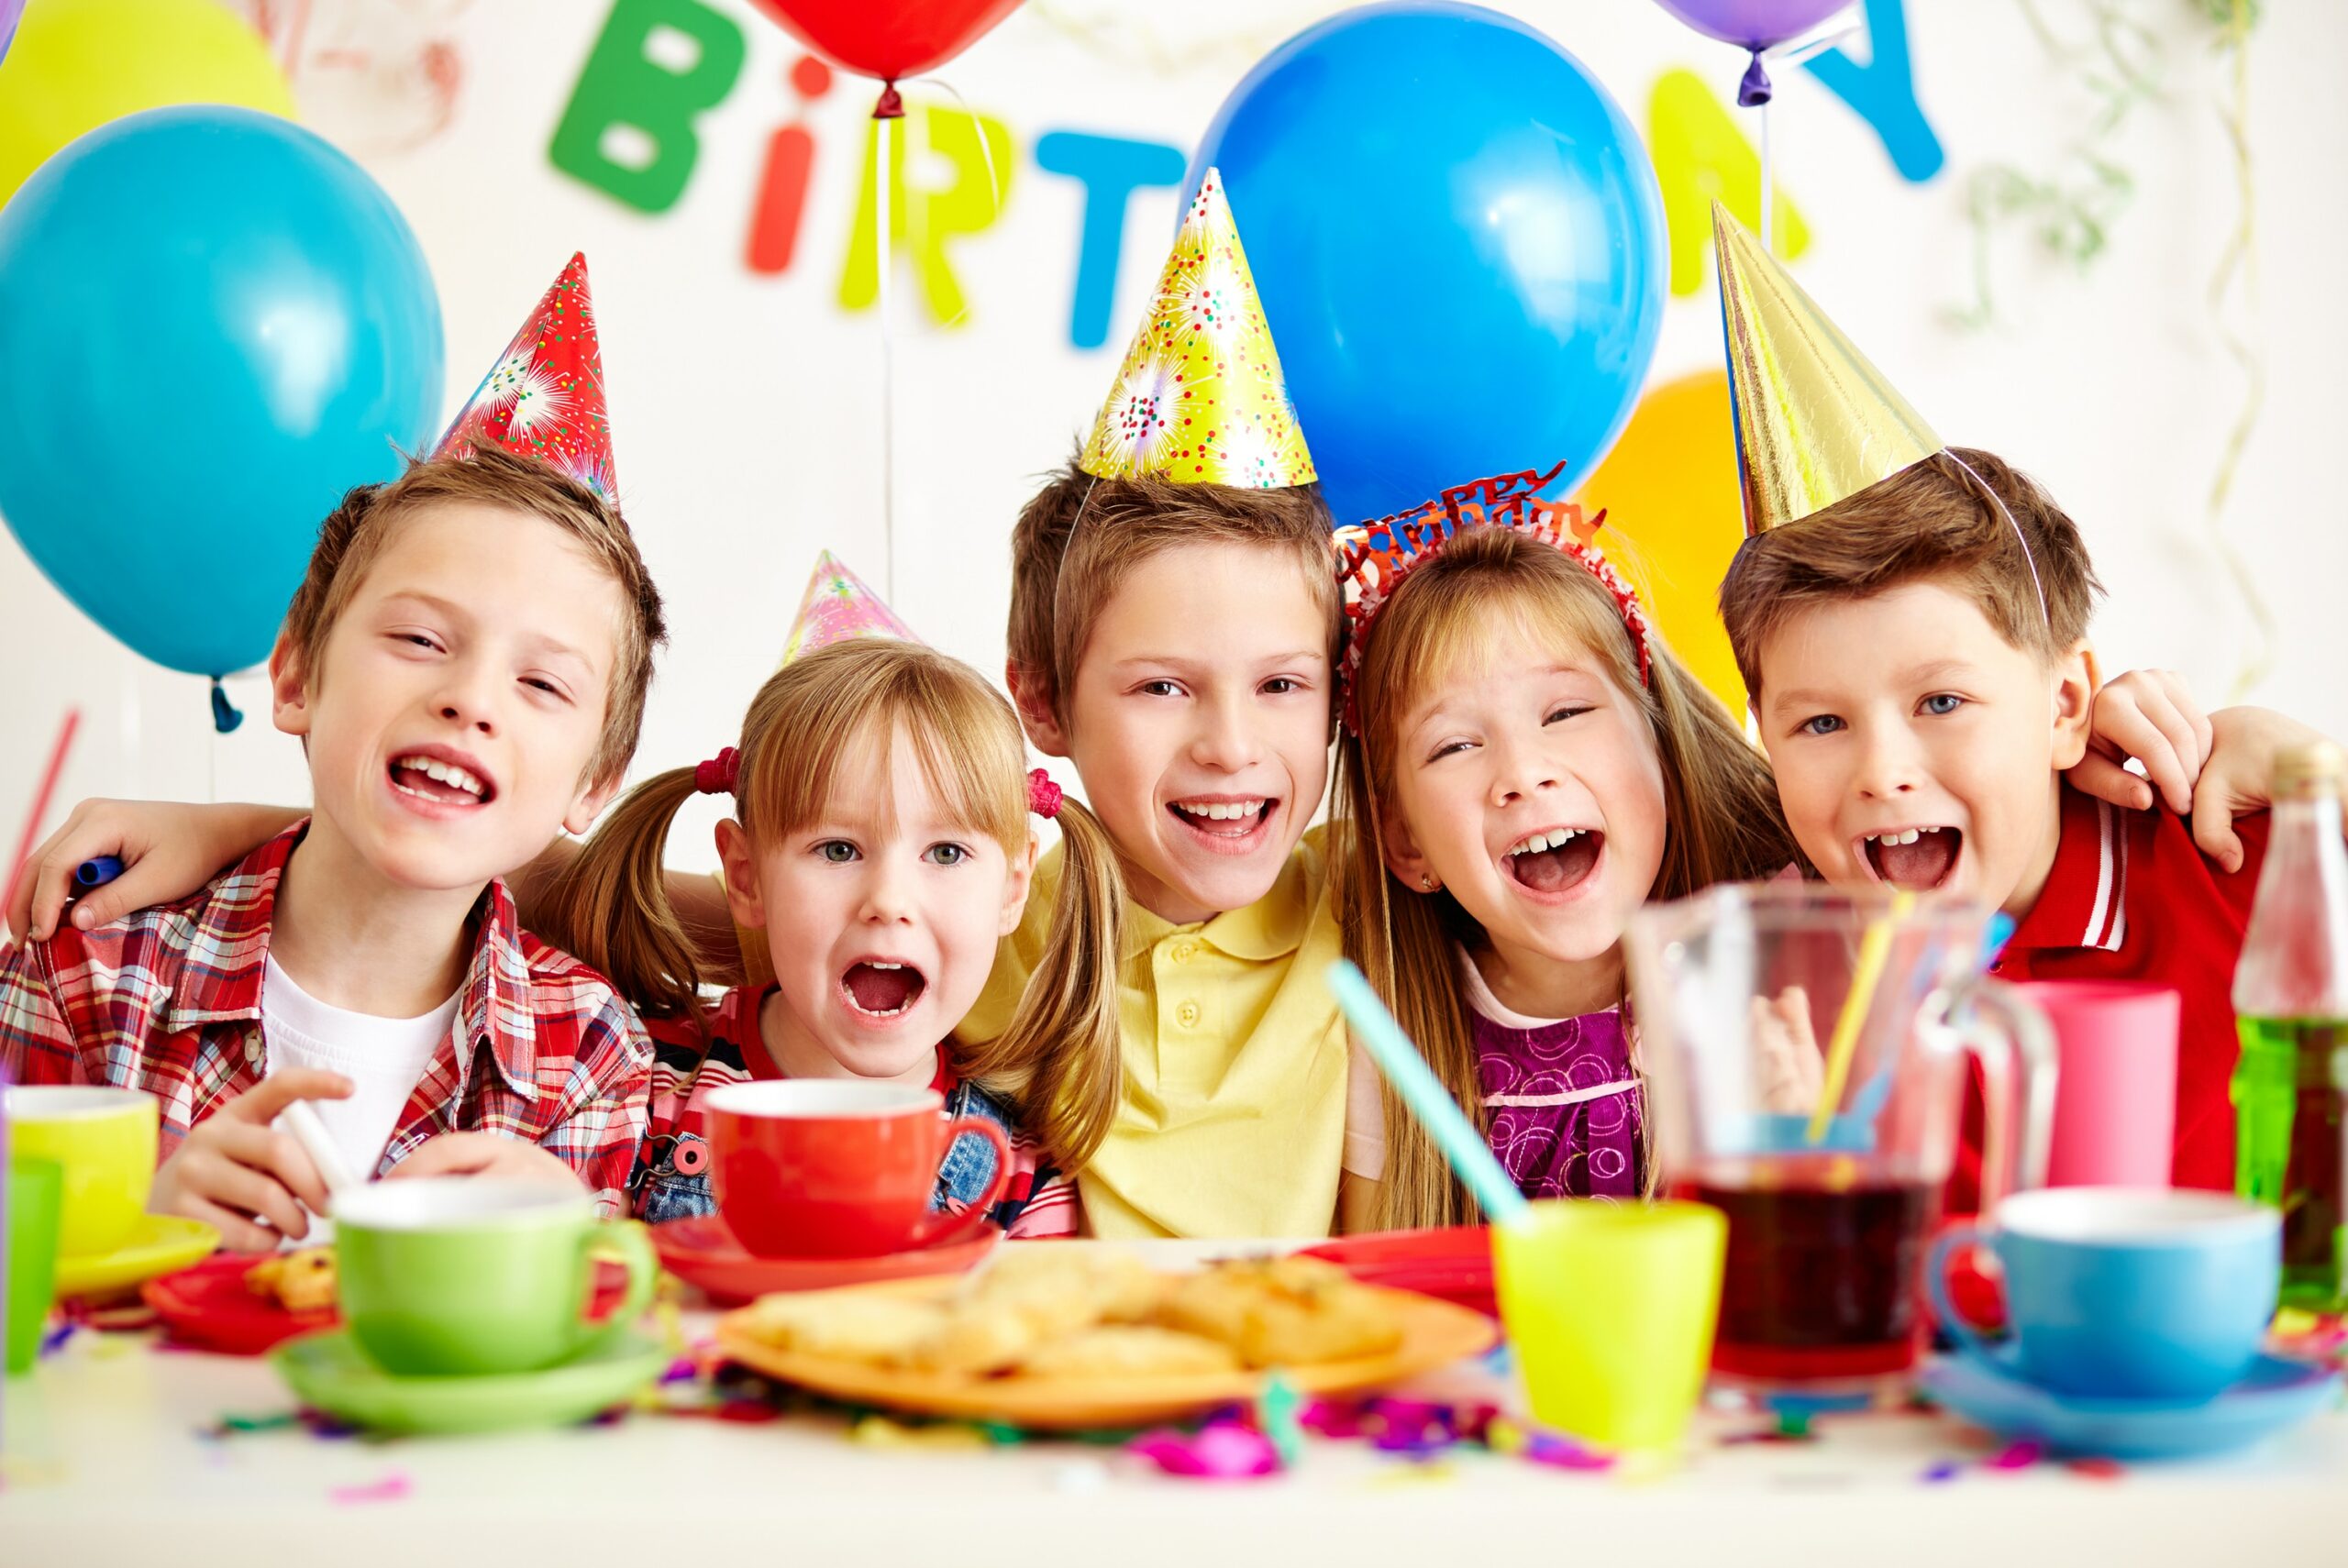 5 Things To Keep In Mind When Planning A Birthday Party